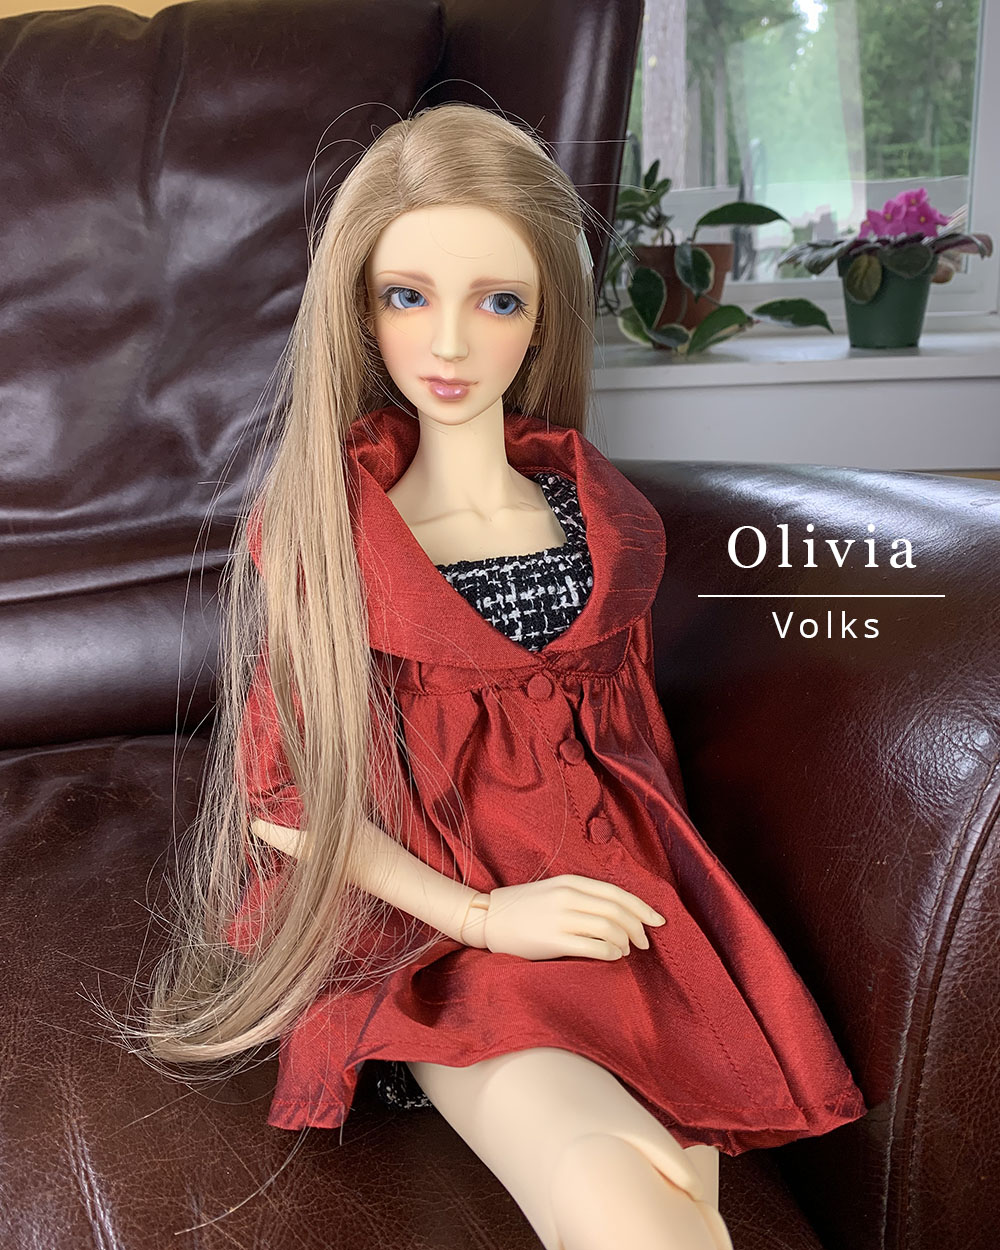 Olivia's doll clothes included many items.